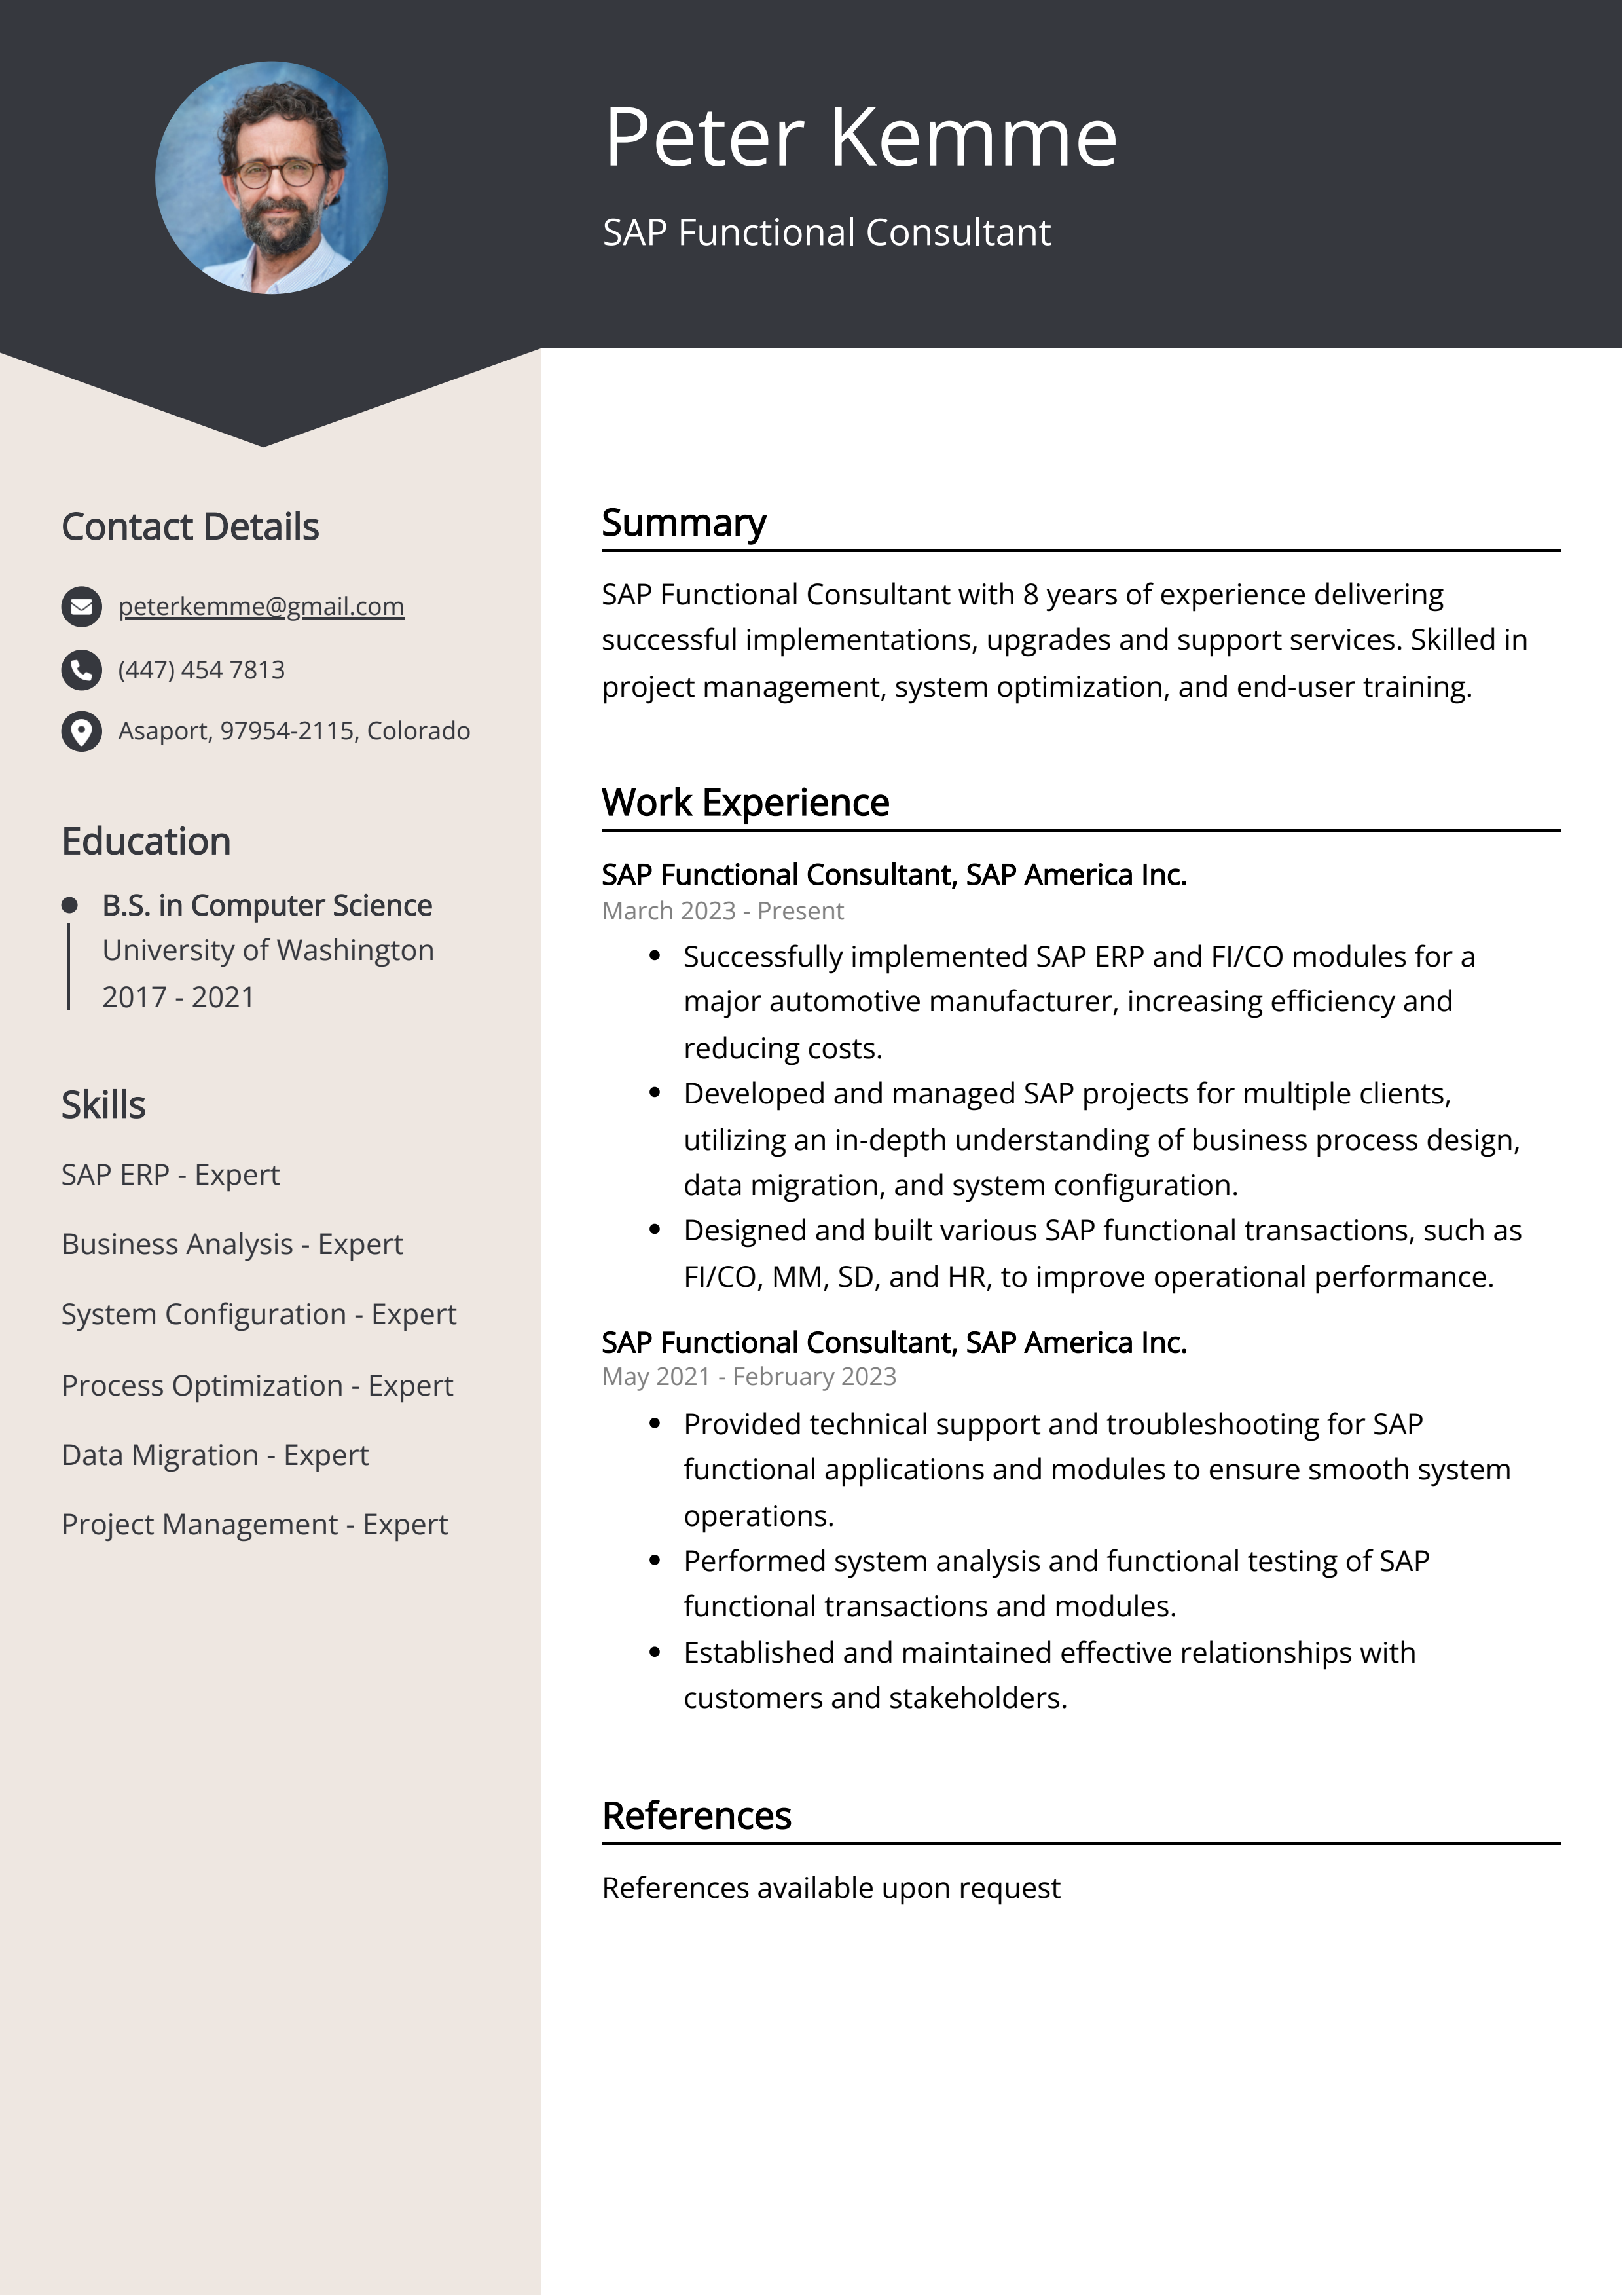 SAP Functional Consultant Resume Example